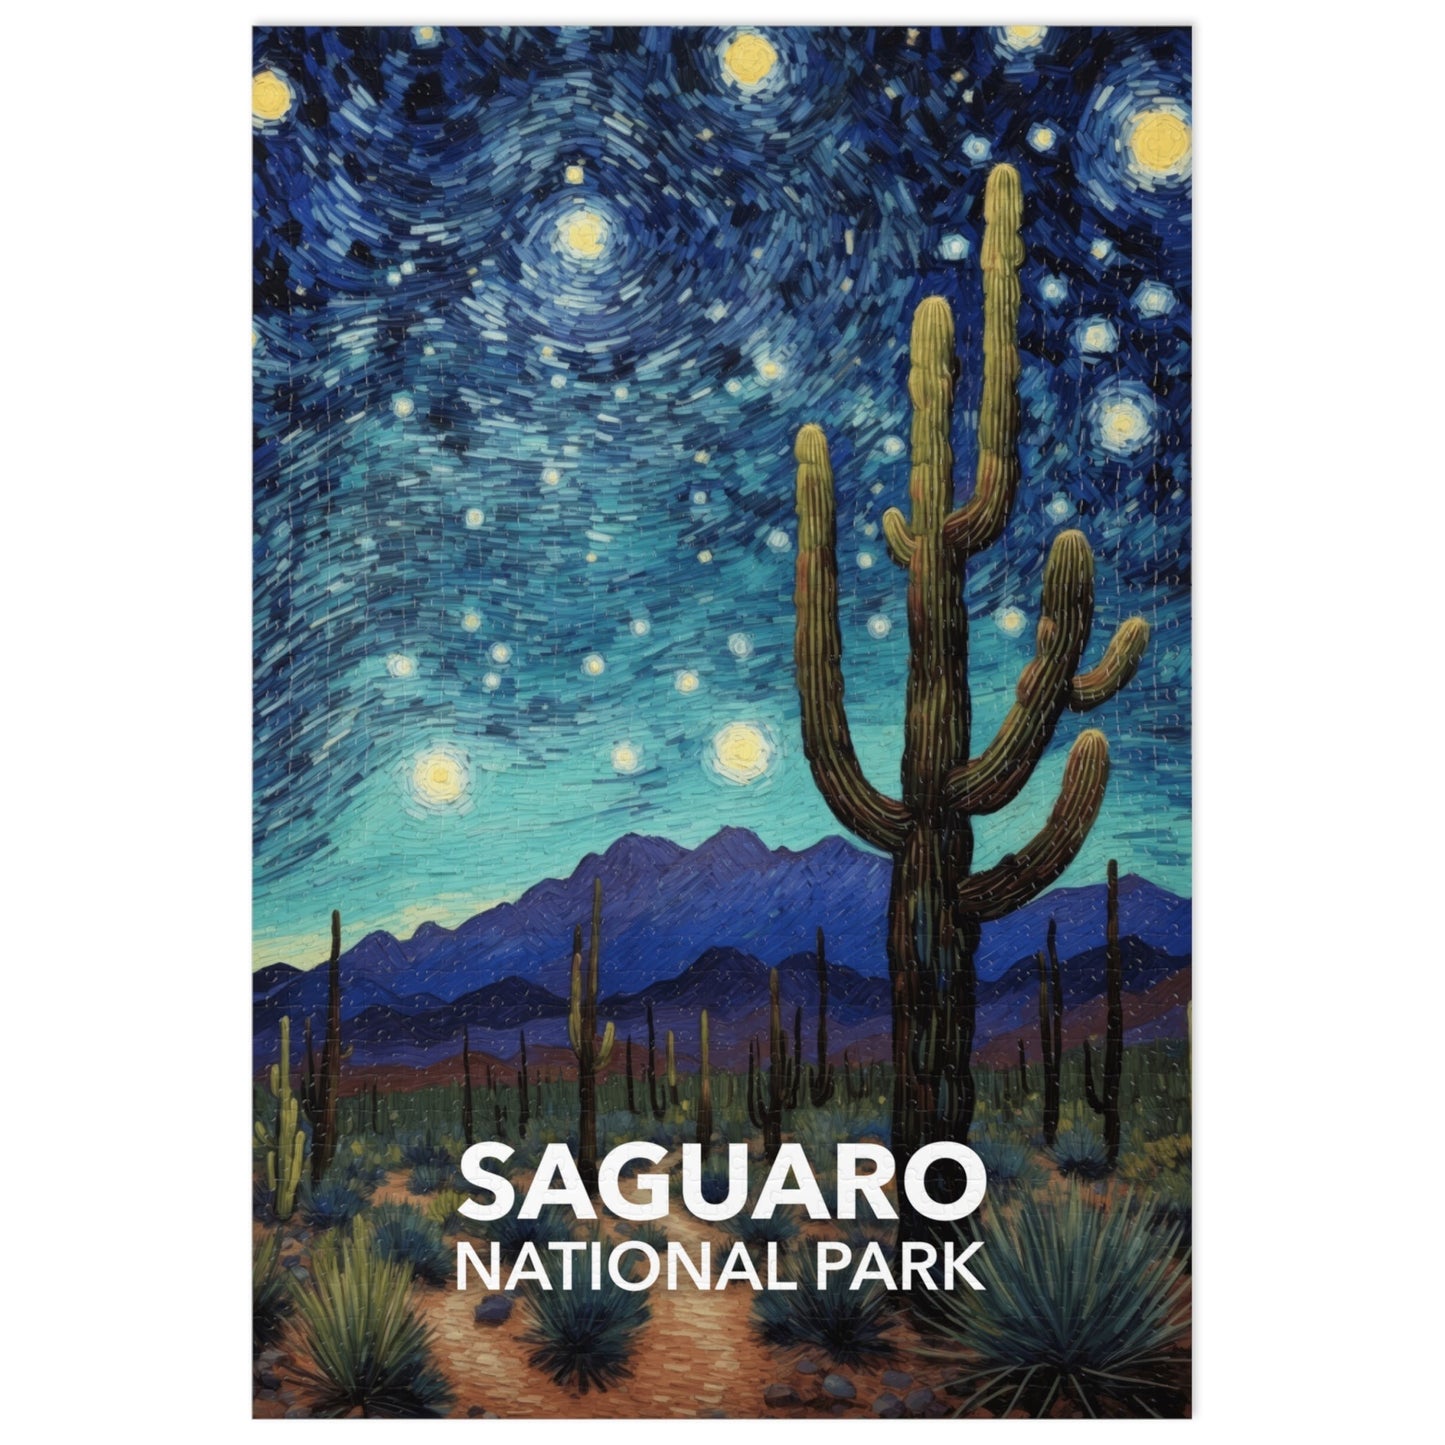 Saguaro National Park Jigsaw Puzzle - The Starry Night